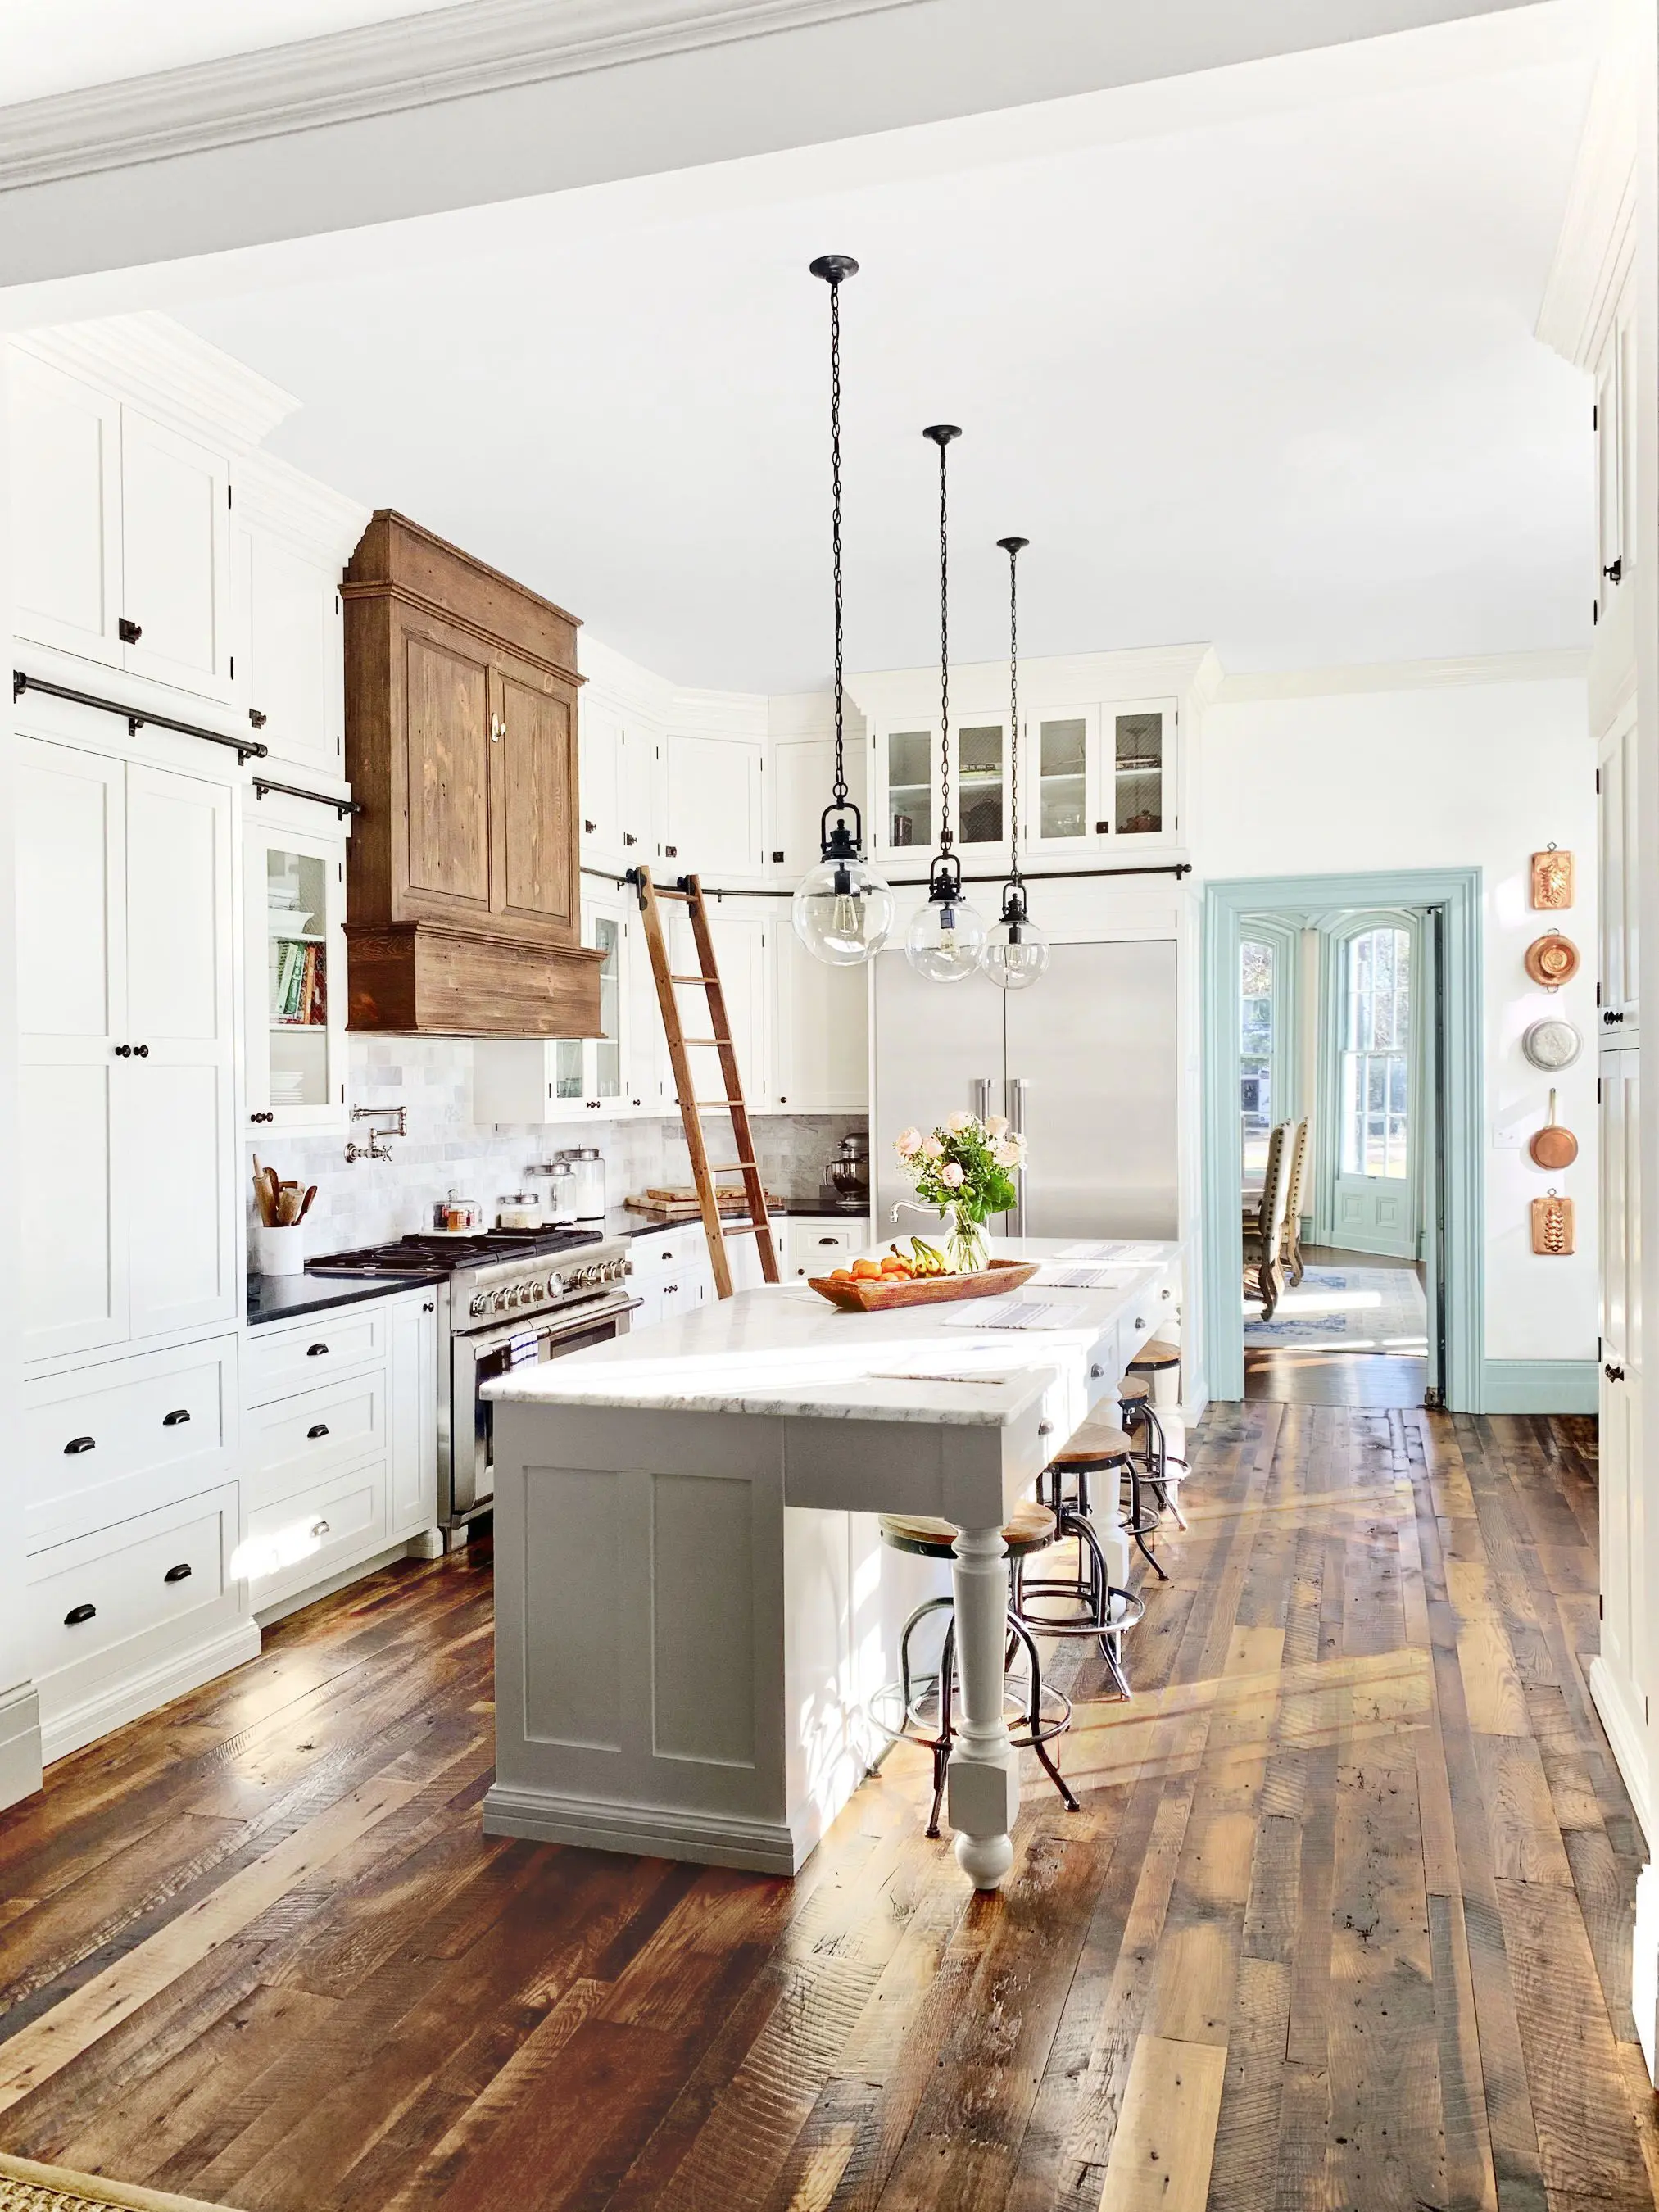 5 Examples of Standout Features in a Farmhouse Kitchen